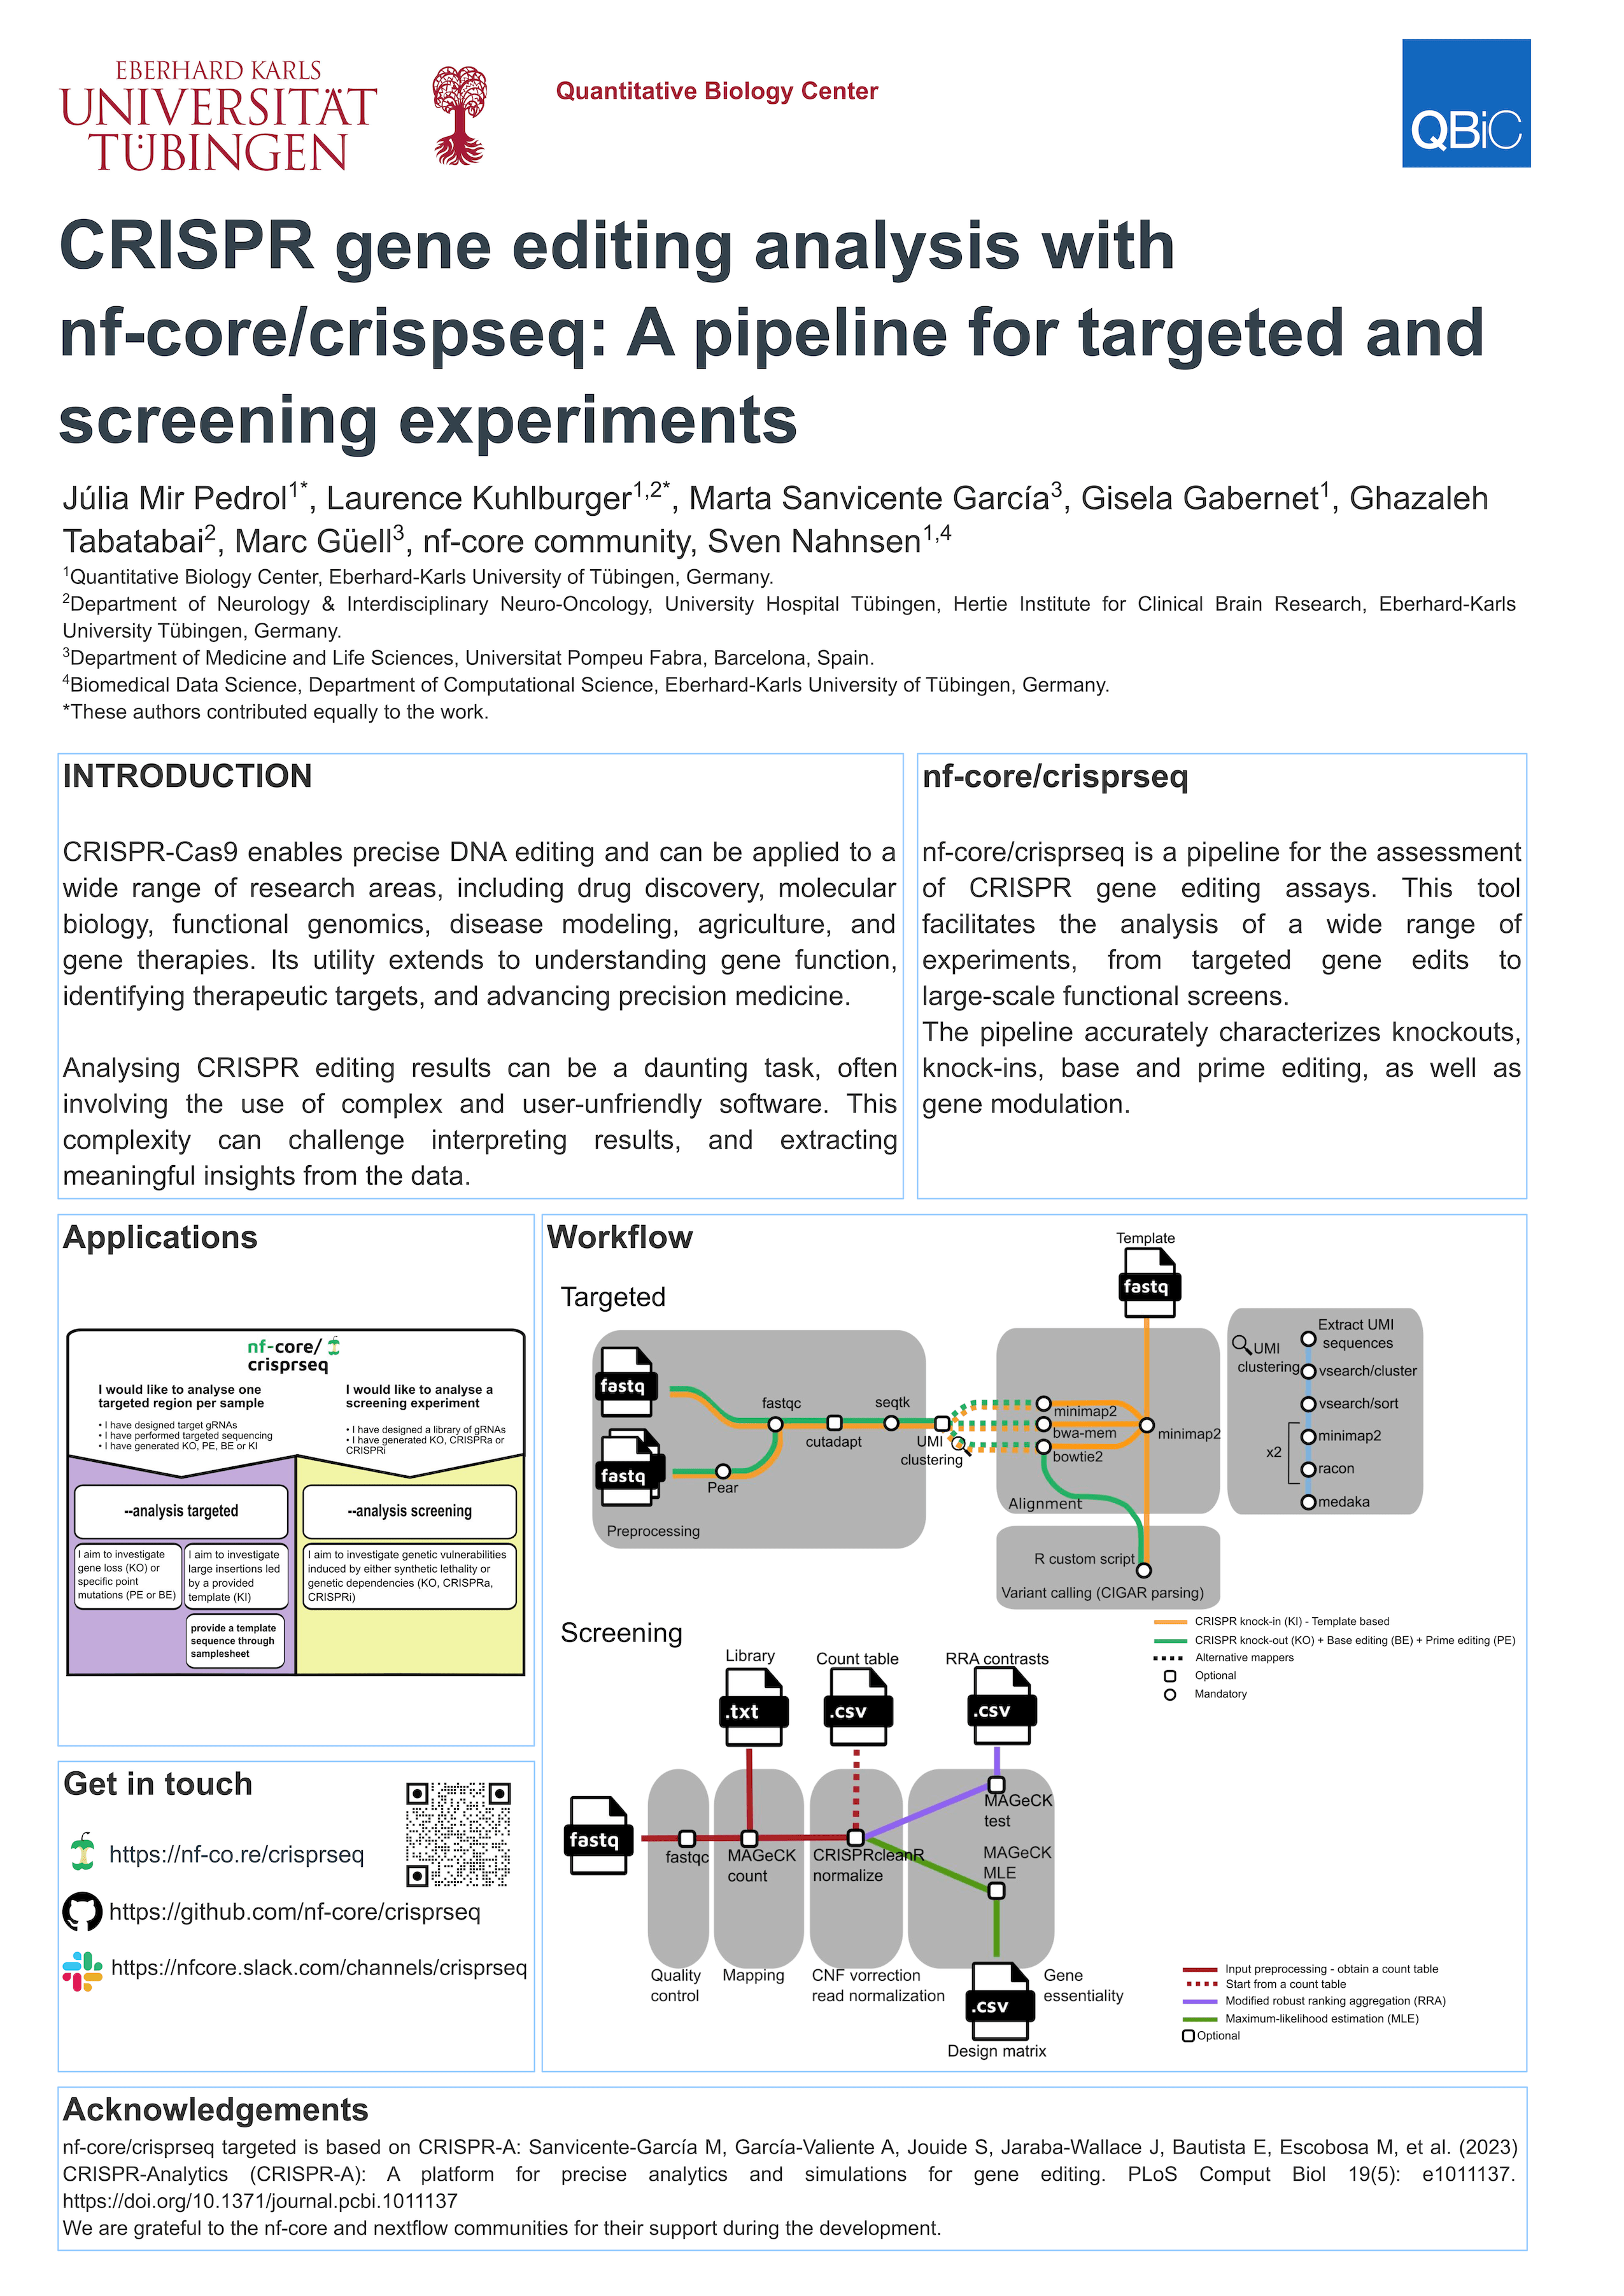 CRISPR gene editing analysis with nf-core/crisprseq: A pipeline for targeted and screening experiments